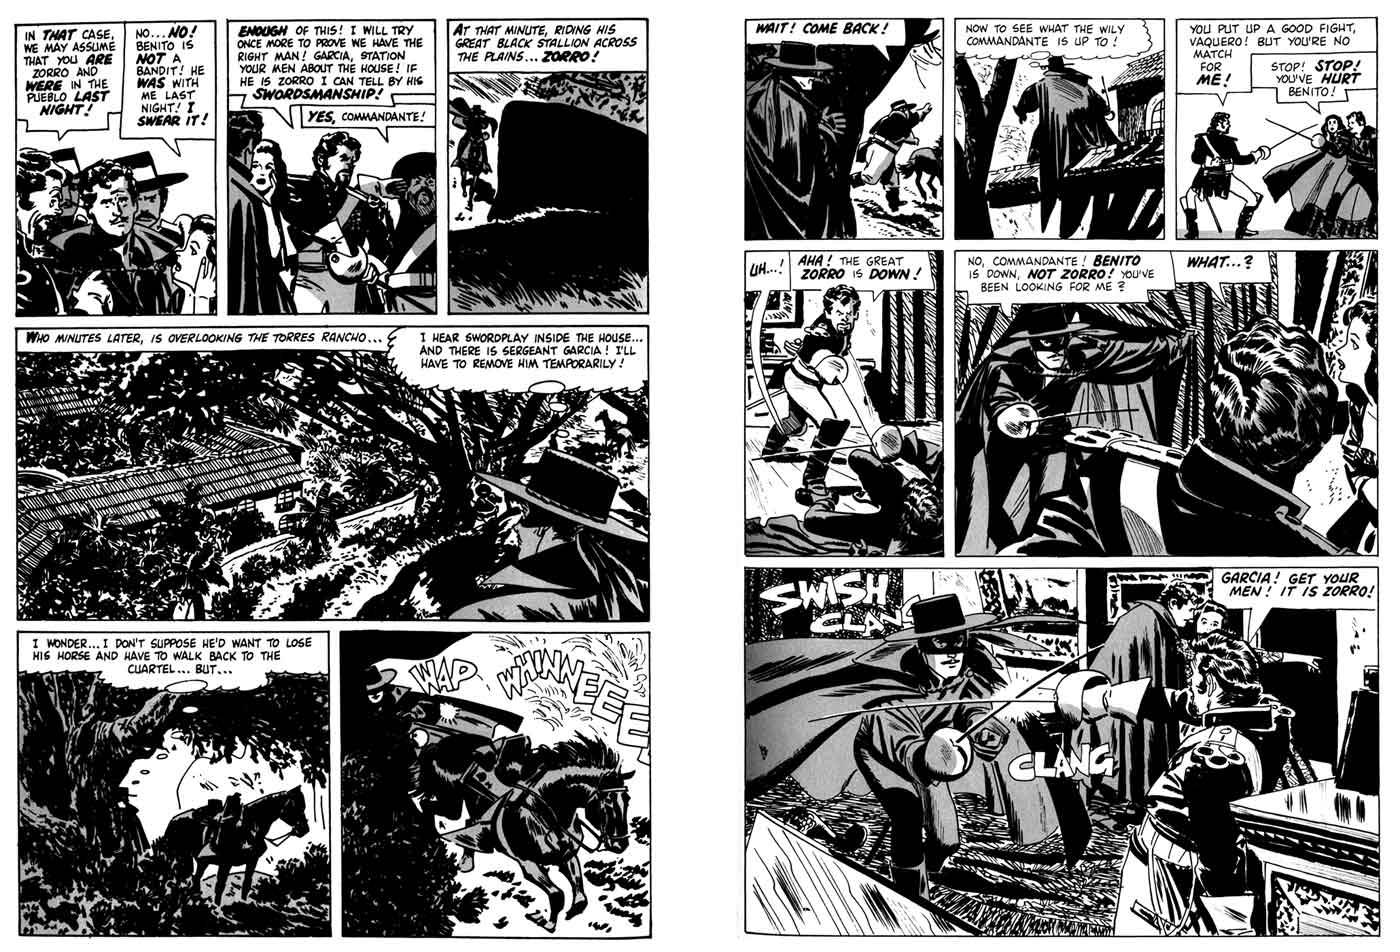 Two pages from "Zorro's Secret Passage" with art by Alex Toth